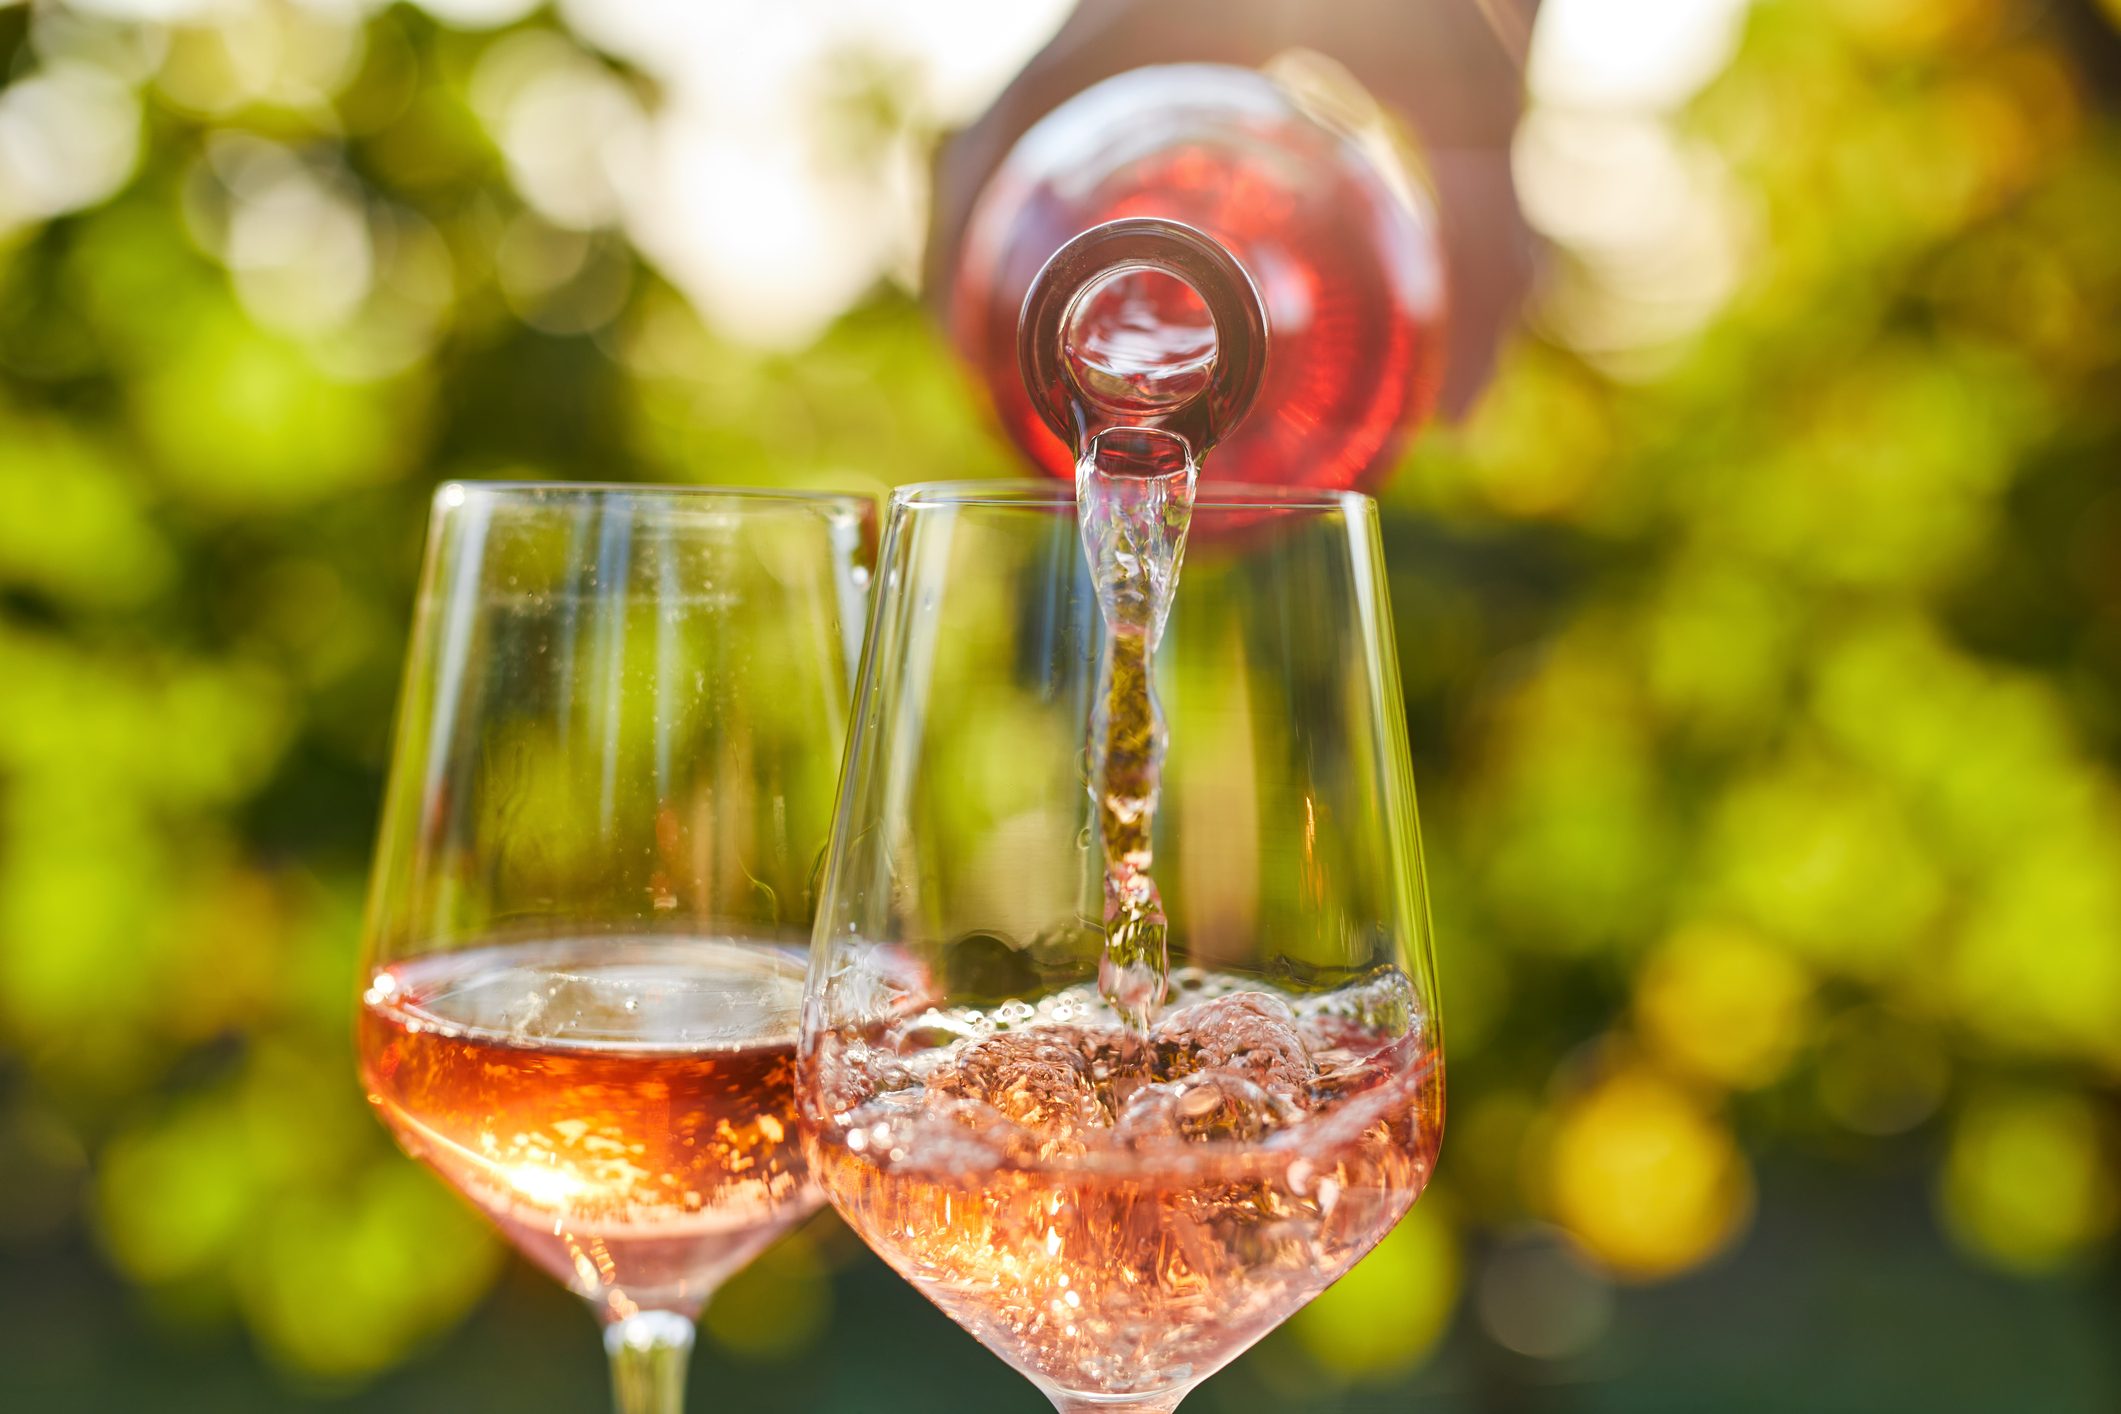 Pouring rose wine into a glass outside on a sunny day